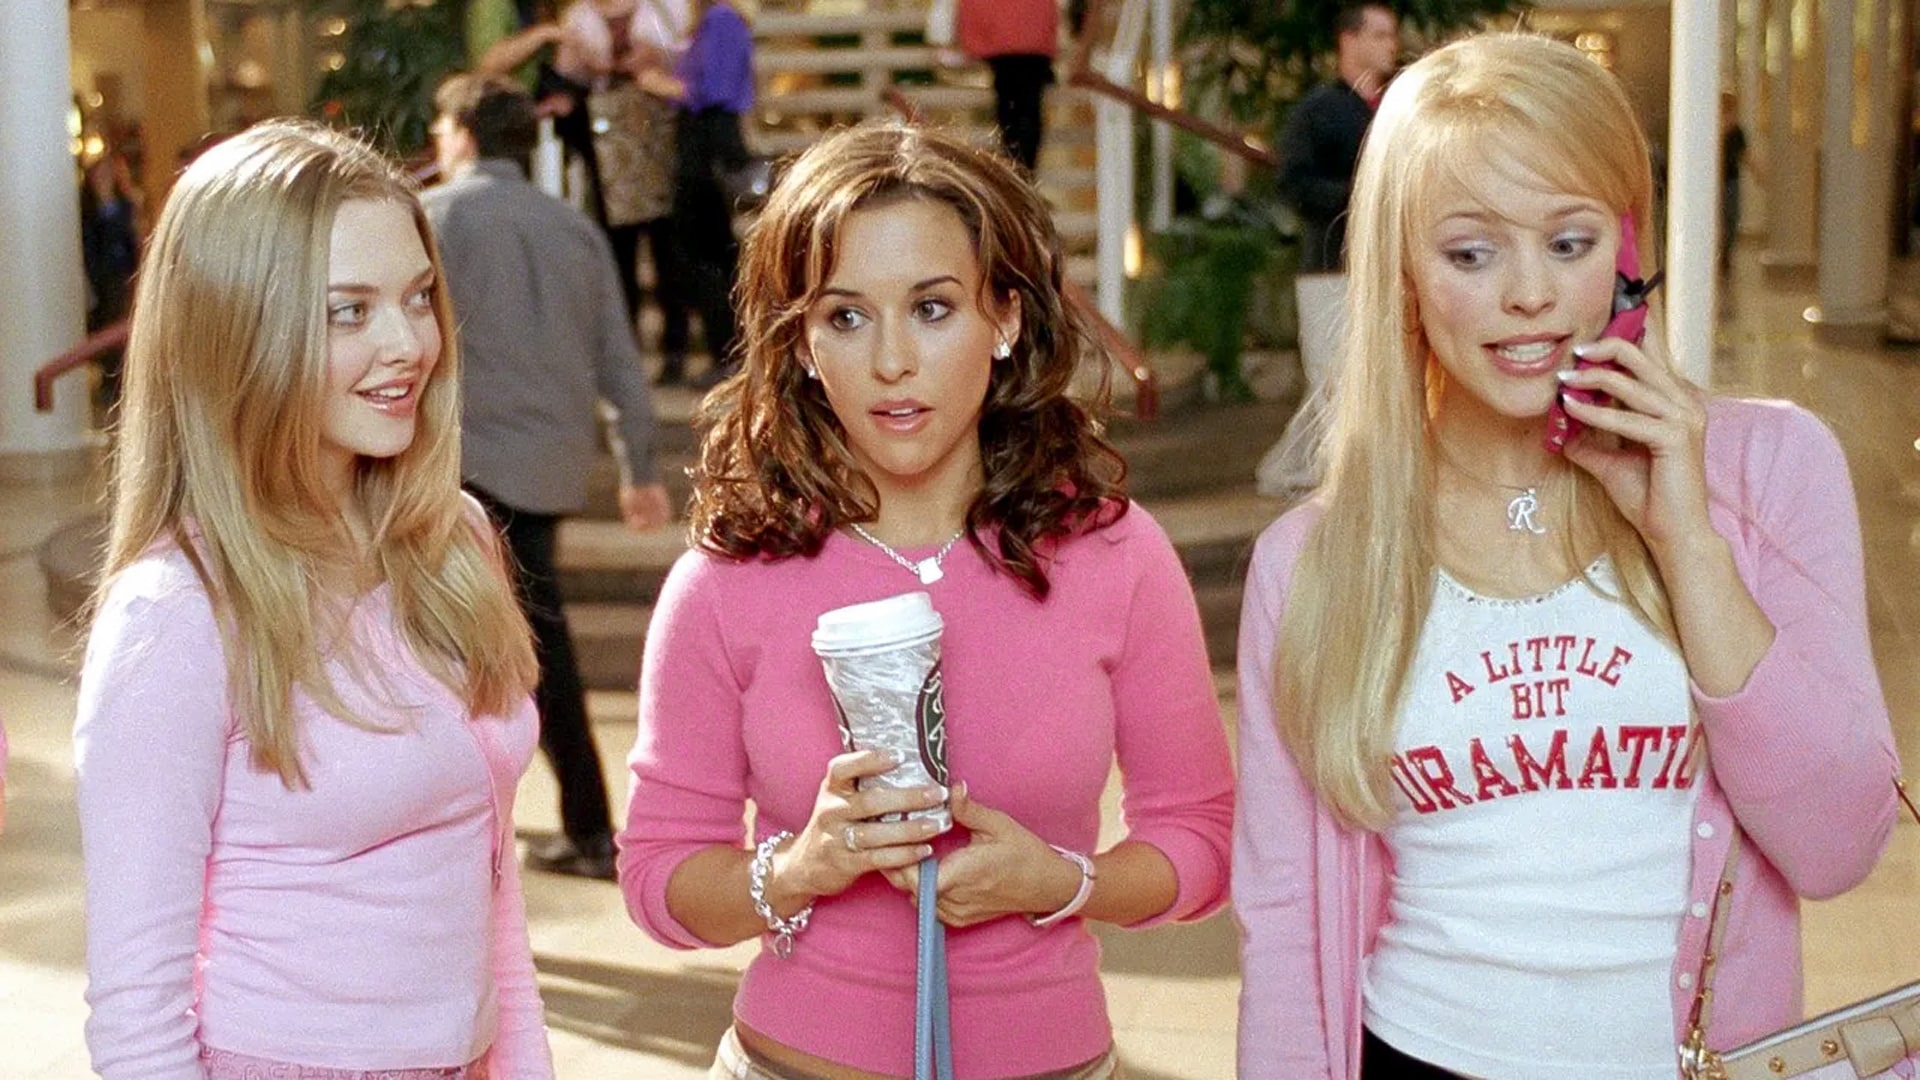 23 Mean Girls (2004) Movie Facts You Haven't Read Before - Mean Girls Movie